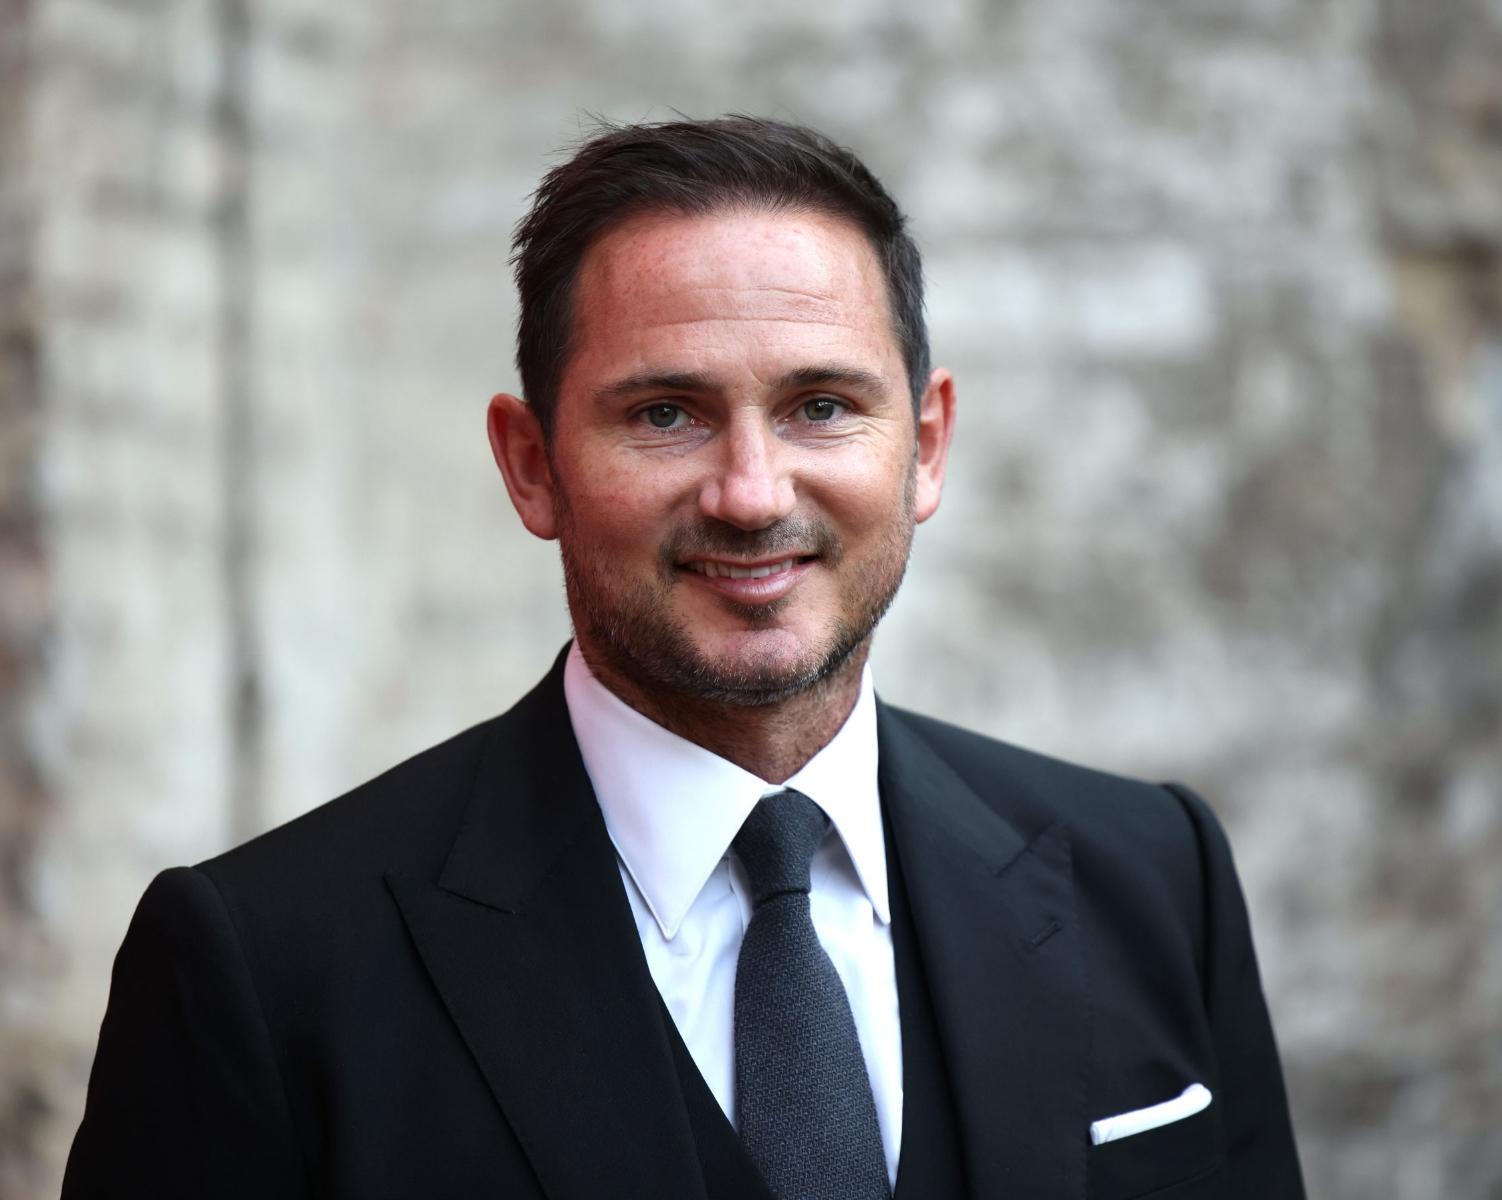 FRANK LAMPARD, CHELSEA MANAGER